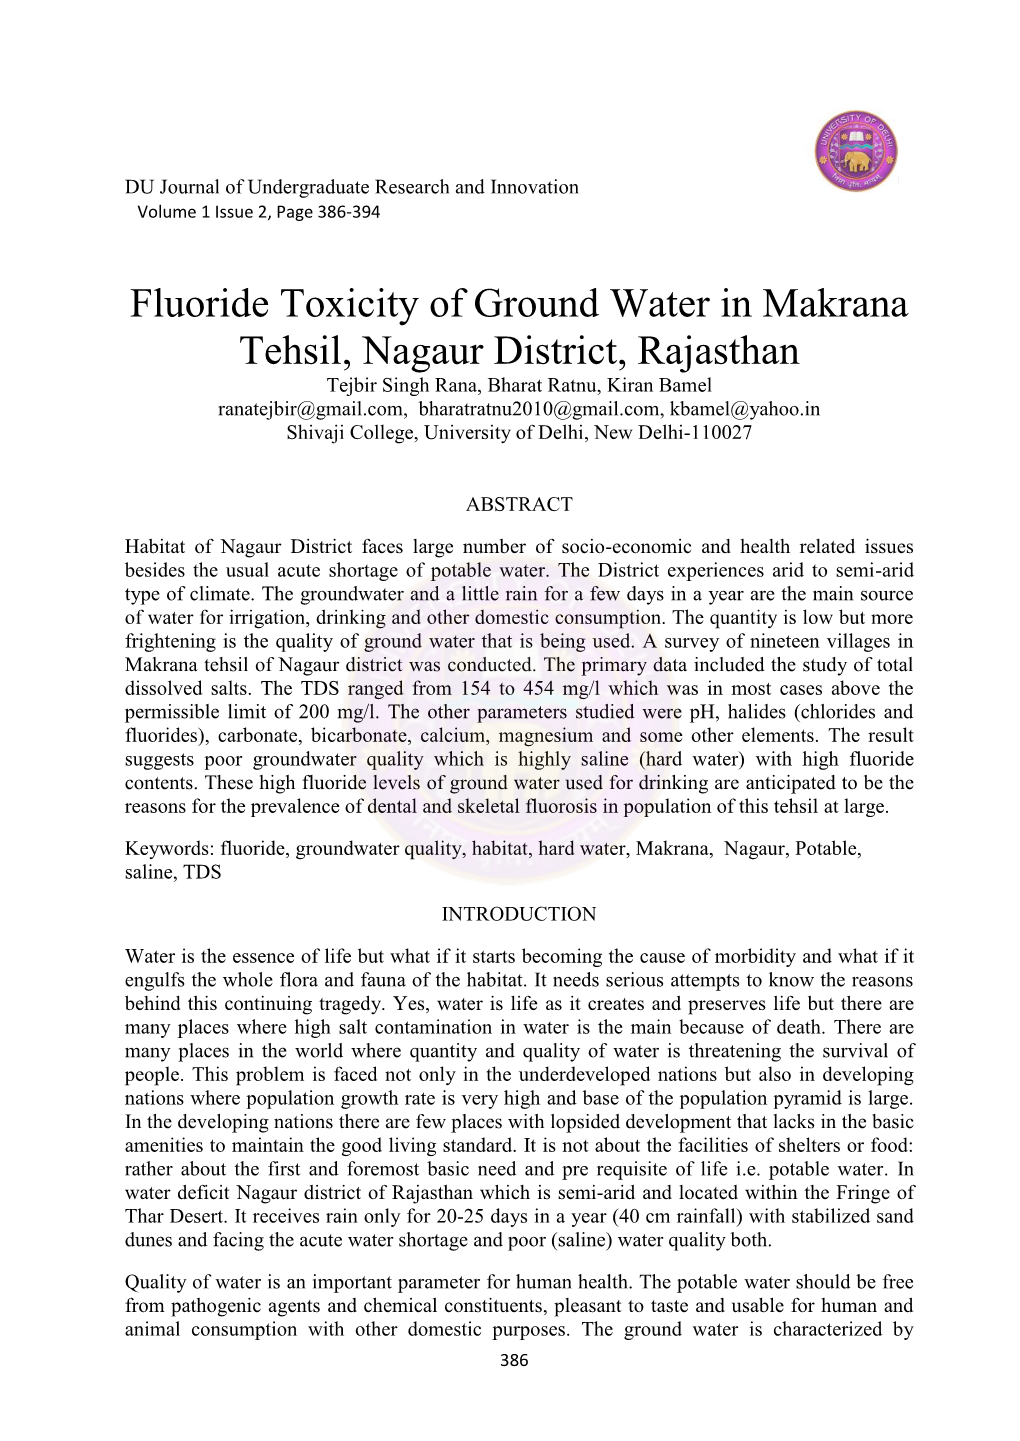 Fluoride Toxicity of Ground Water in Makrana Tehsil, Nagaur District